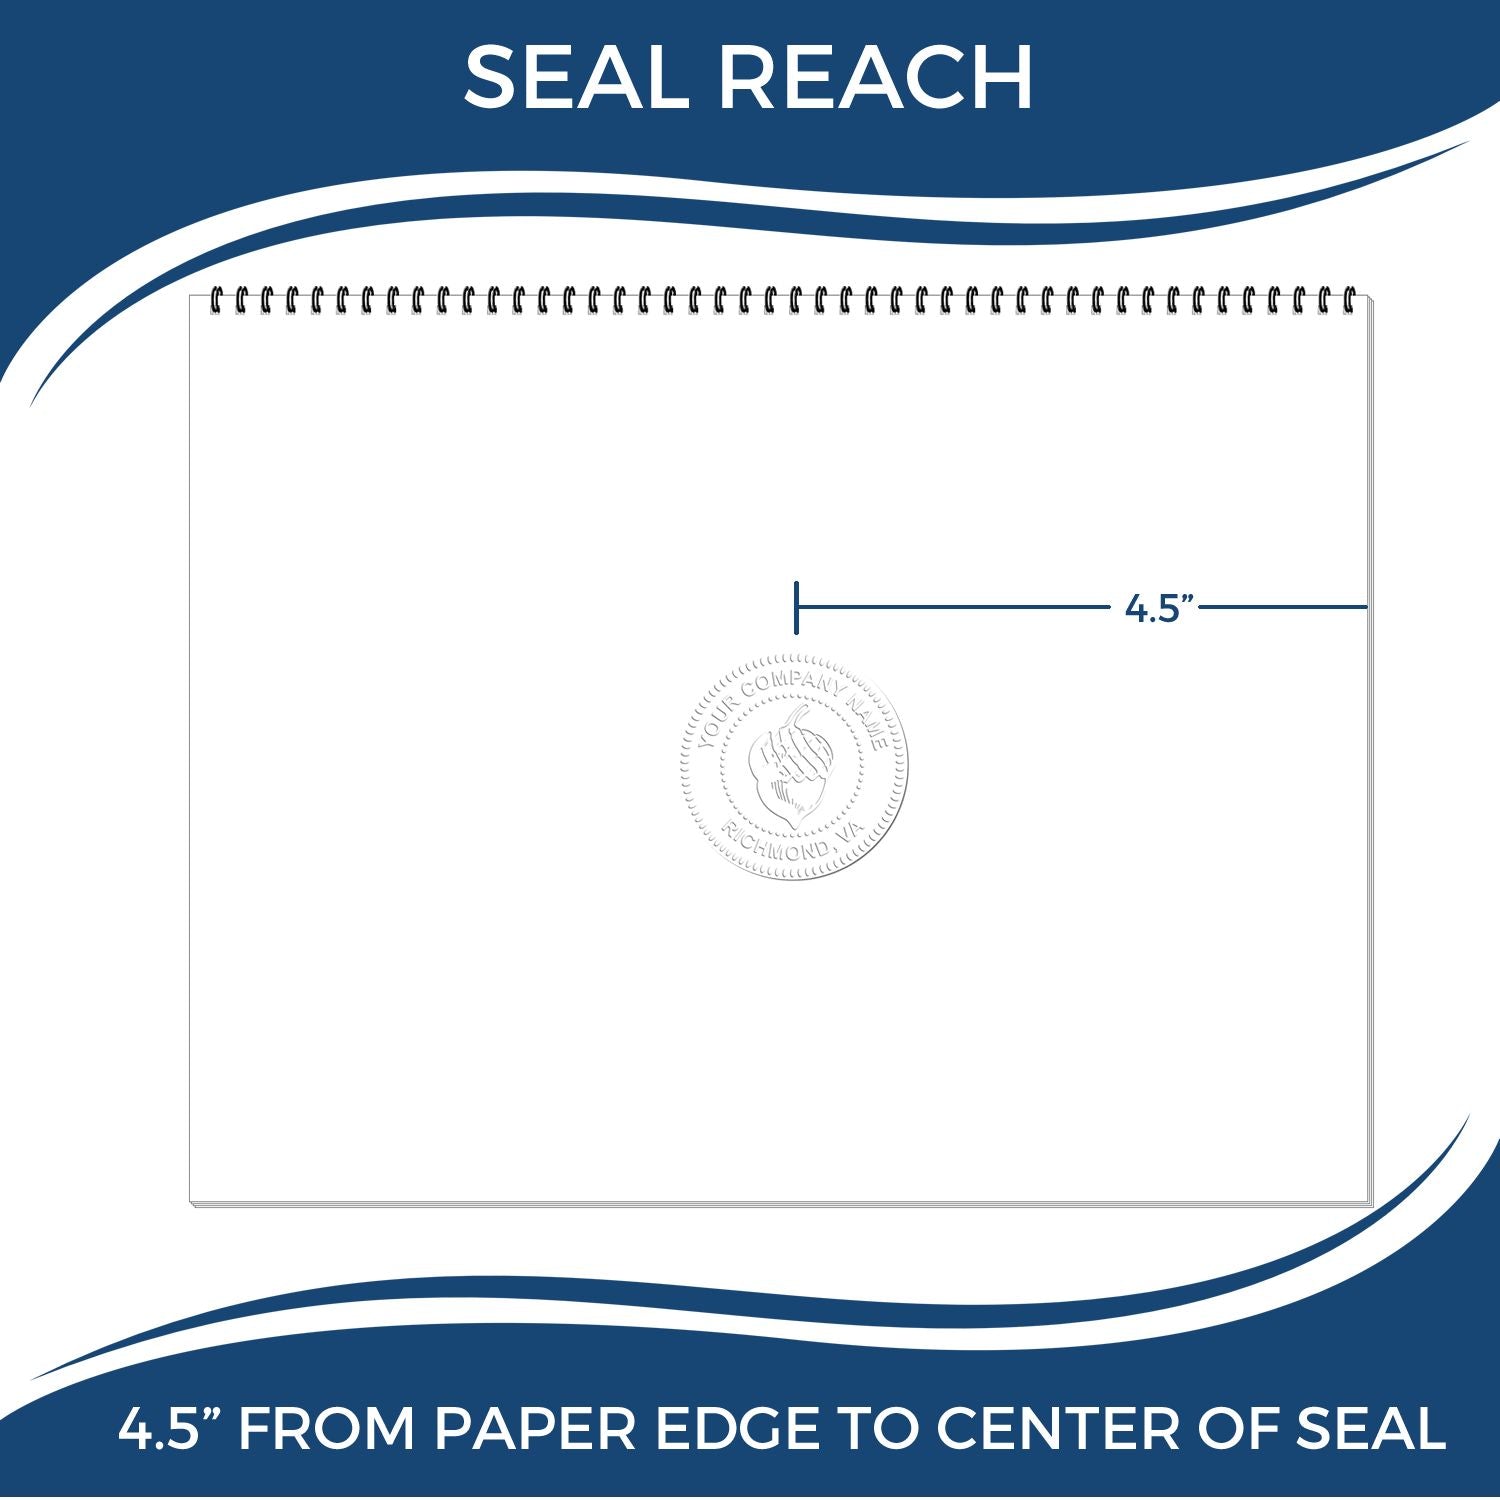 An infographic showing the seal reach which is represented by a ruler and a miniature seal image of the Extended Long Reach Rhode Island Architect Seal Embosser